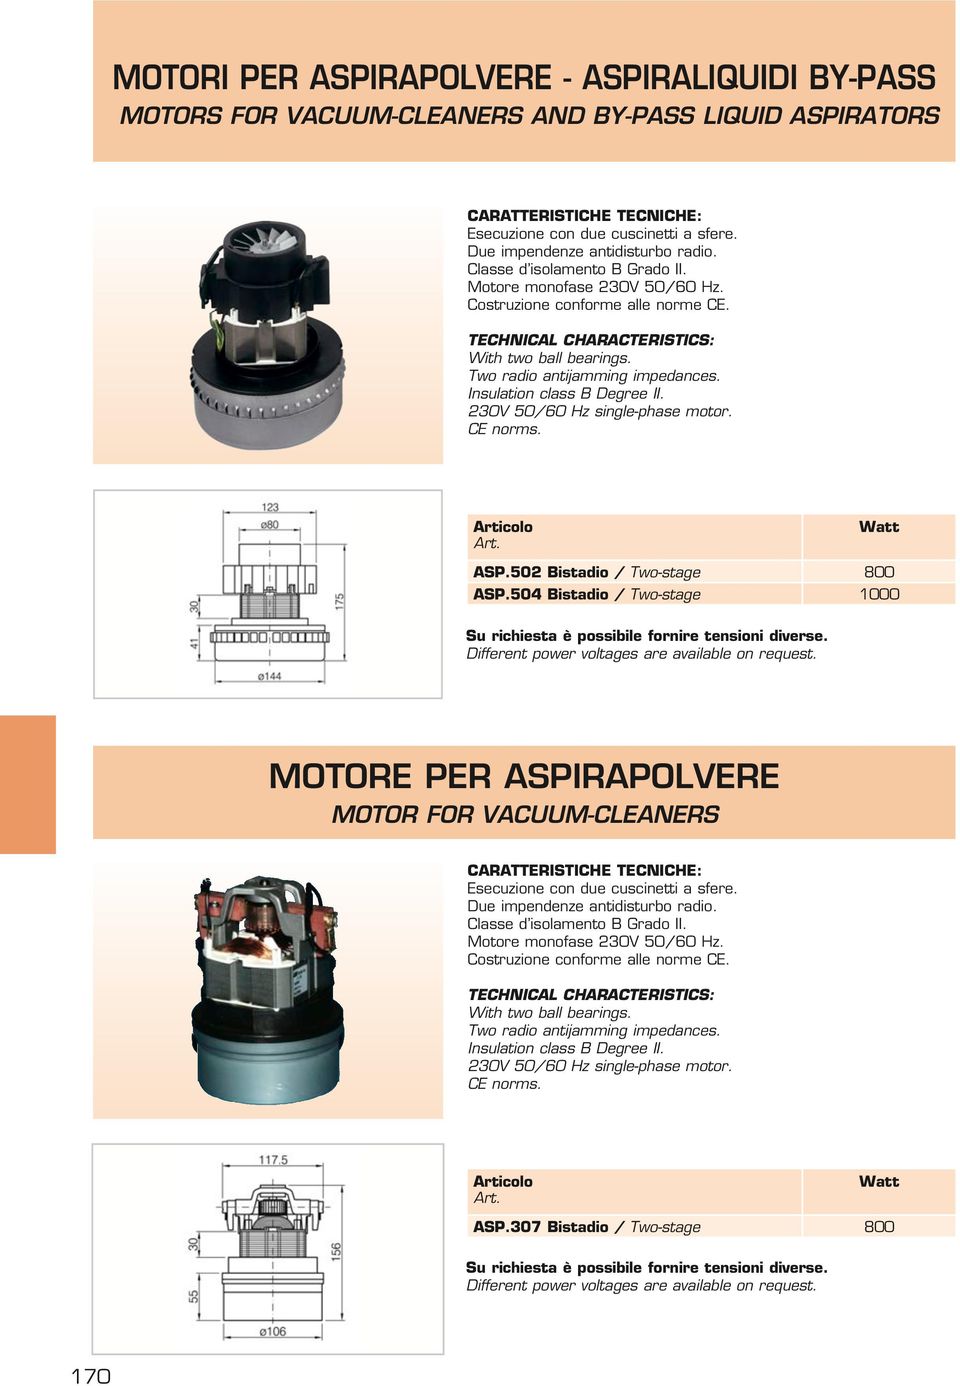 Insulation class Degree II. 230V 50/60 Hz single-phase motor. CE norms. Watt SP.502 istadio / Two-stage 800 SP.504 istadio / Two-stage 1000 Su richiesta è possibile fornire tensioni diverse.